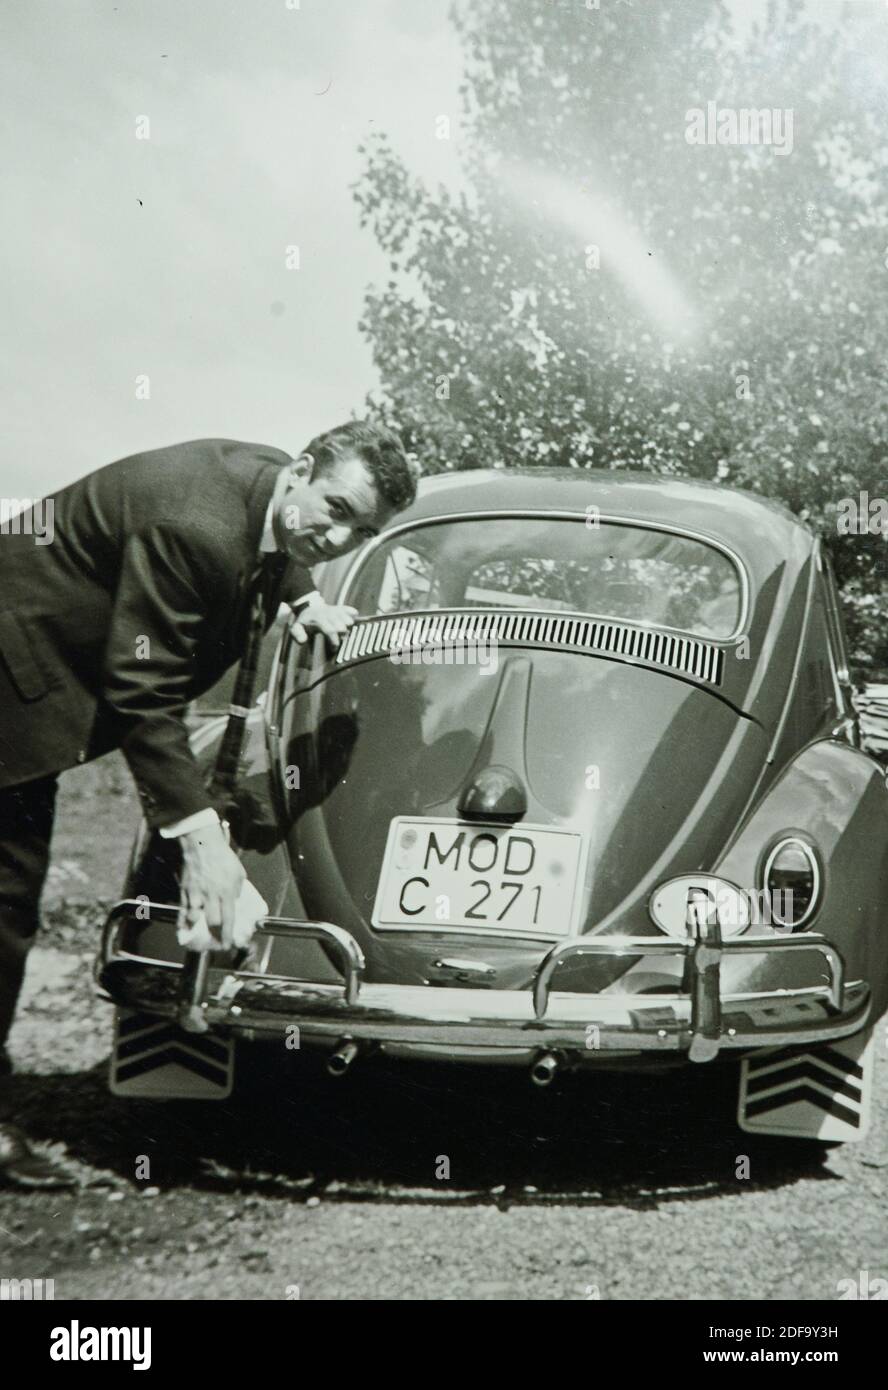 Historical Photo:  A man cleans his VW Kaefer car  1962 in Biessenhofen, Bavaria, Germany. Reproduction in Marktoberdorf, Germany, October 26, 2020.  © Peter Schatz / Alamy Stock Photos Stock Photo